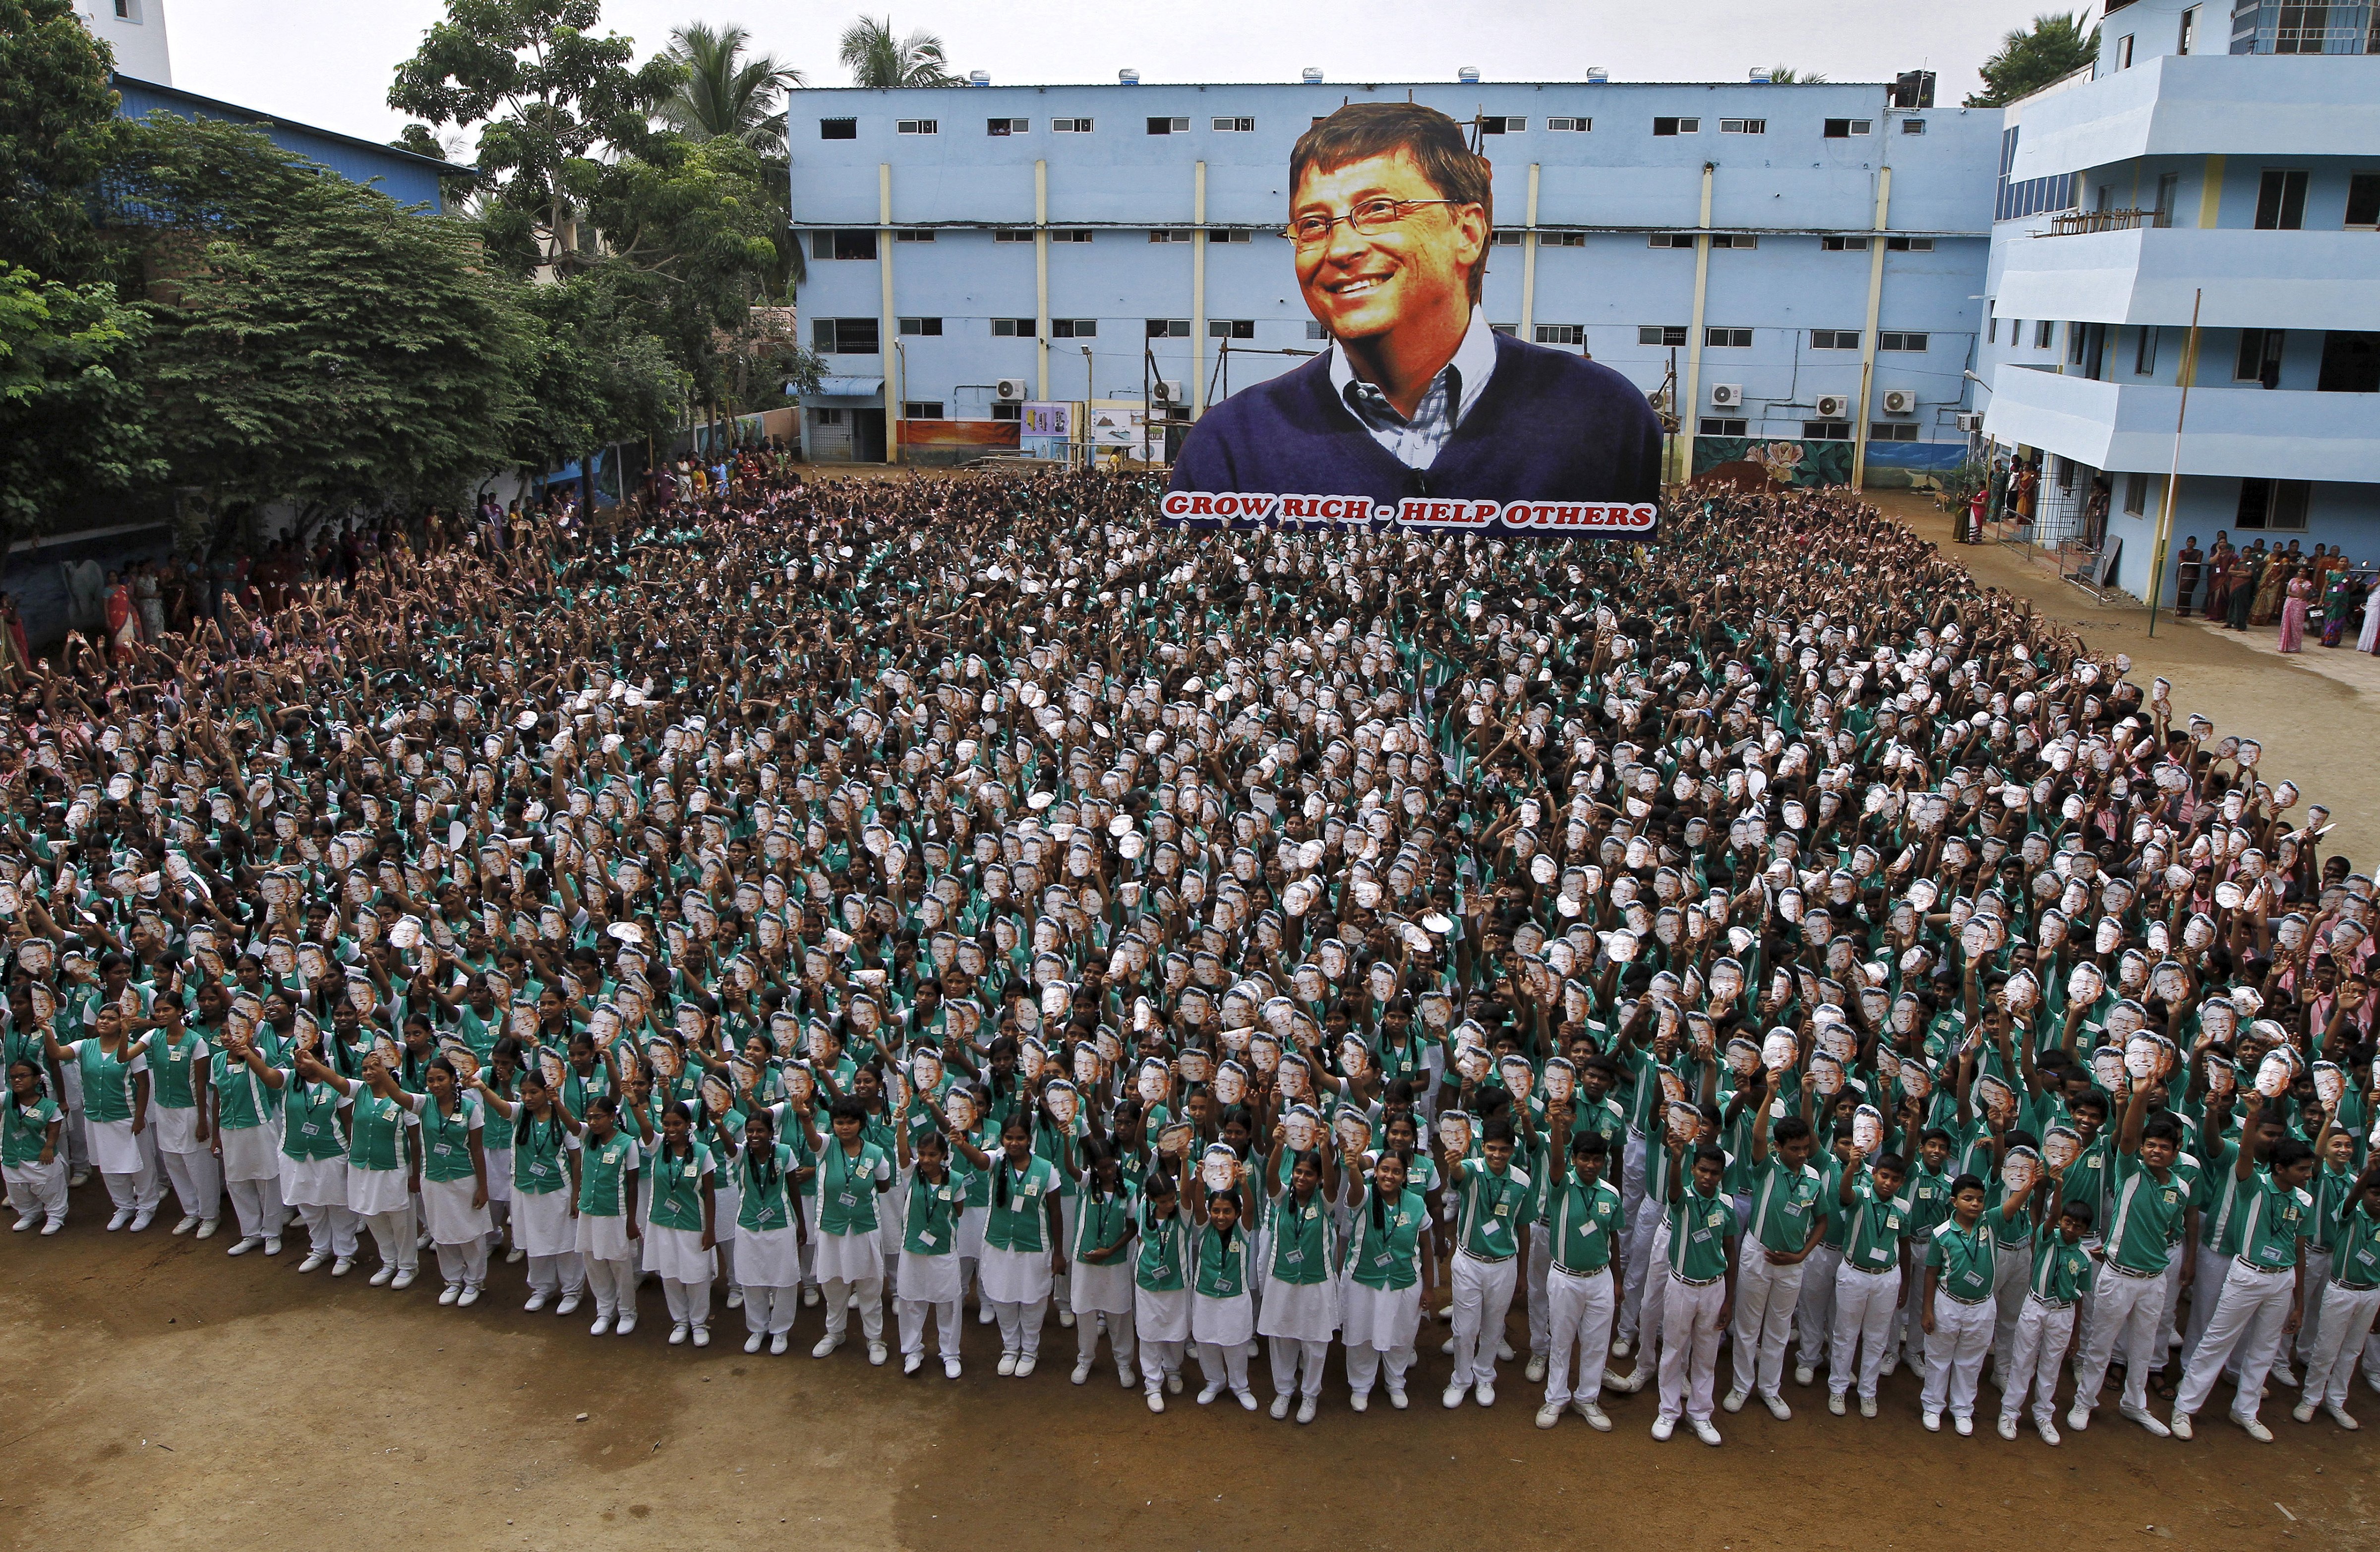 School children hold portraits of Microsoft co-founder Bill Gates in front of a giant picture of Gates during celebrations to mark his 60th birthday inside the school premises in Chennai, India on Oct. 28, 2015. (Reuters)